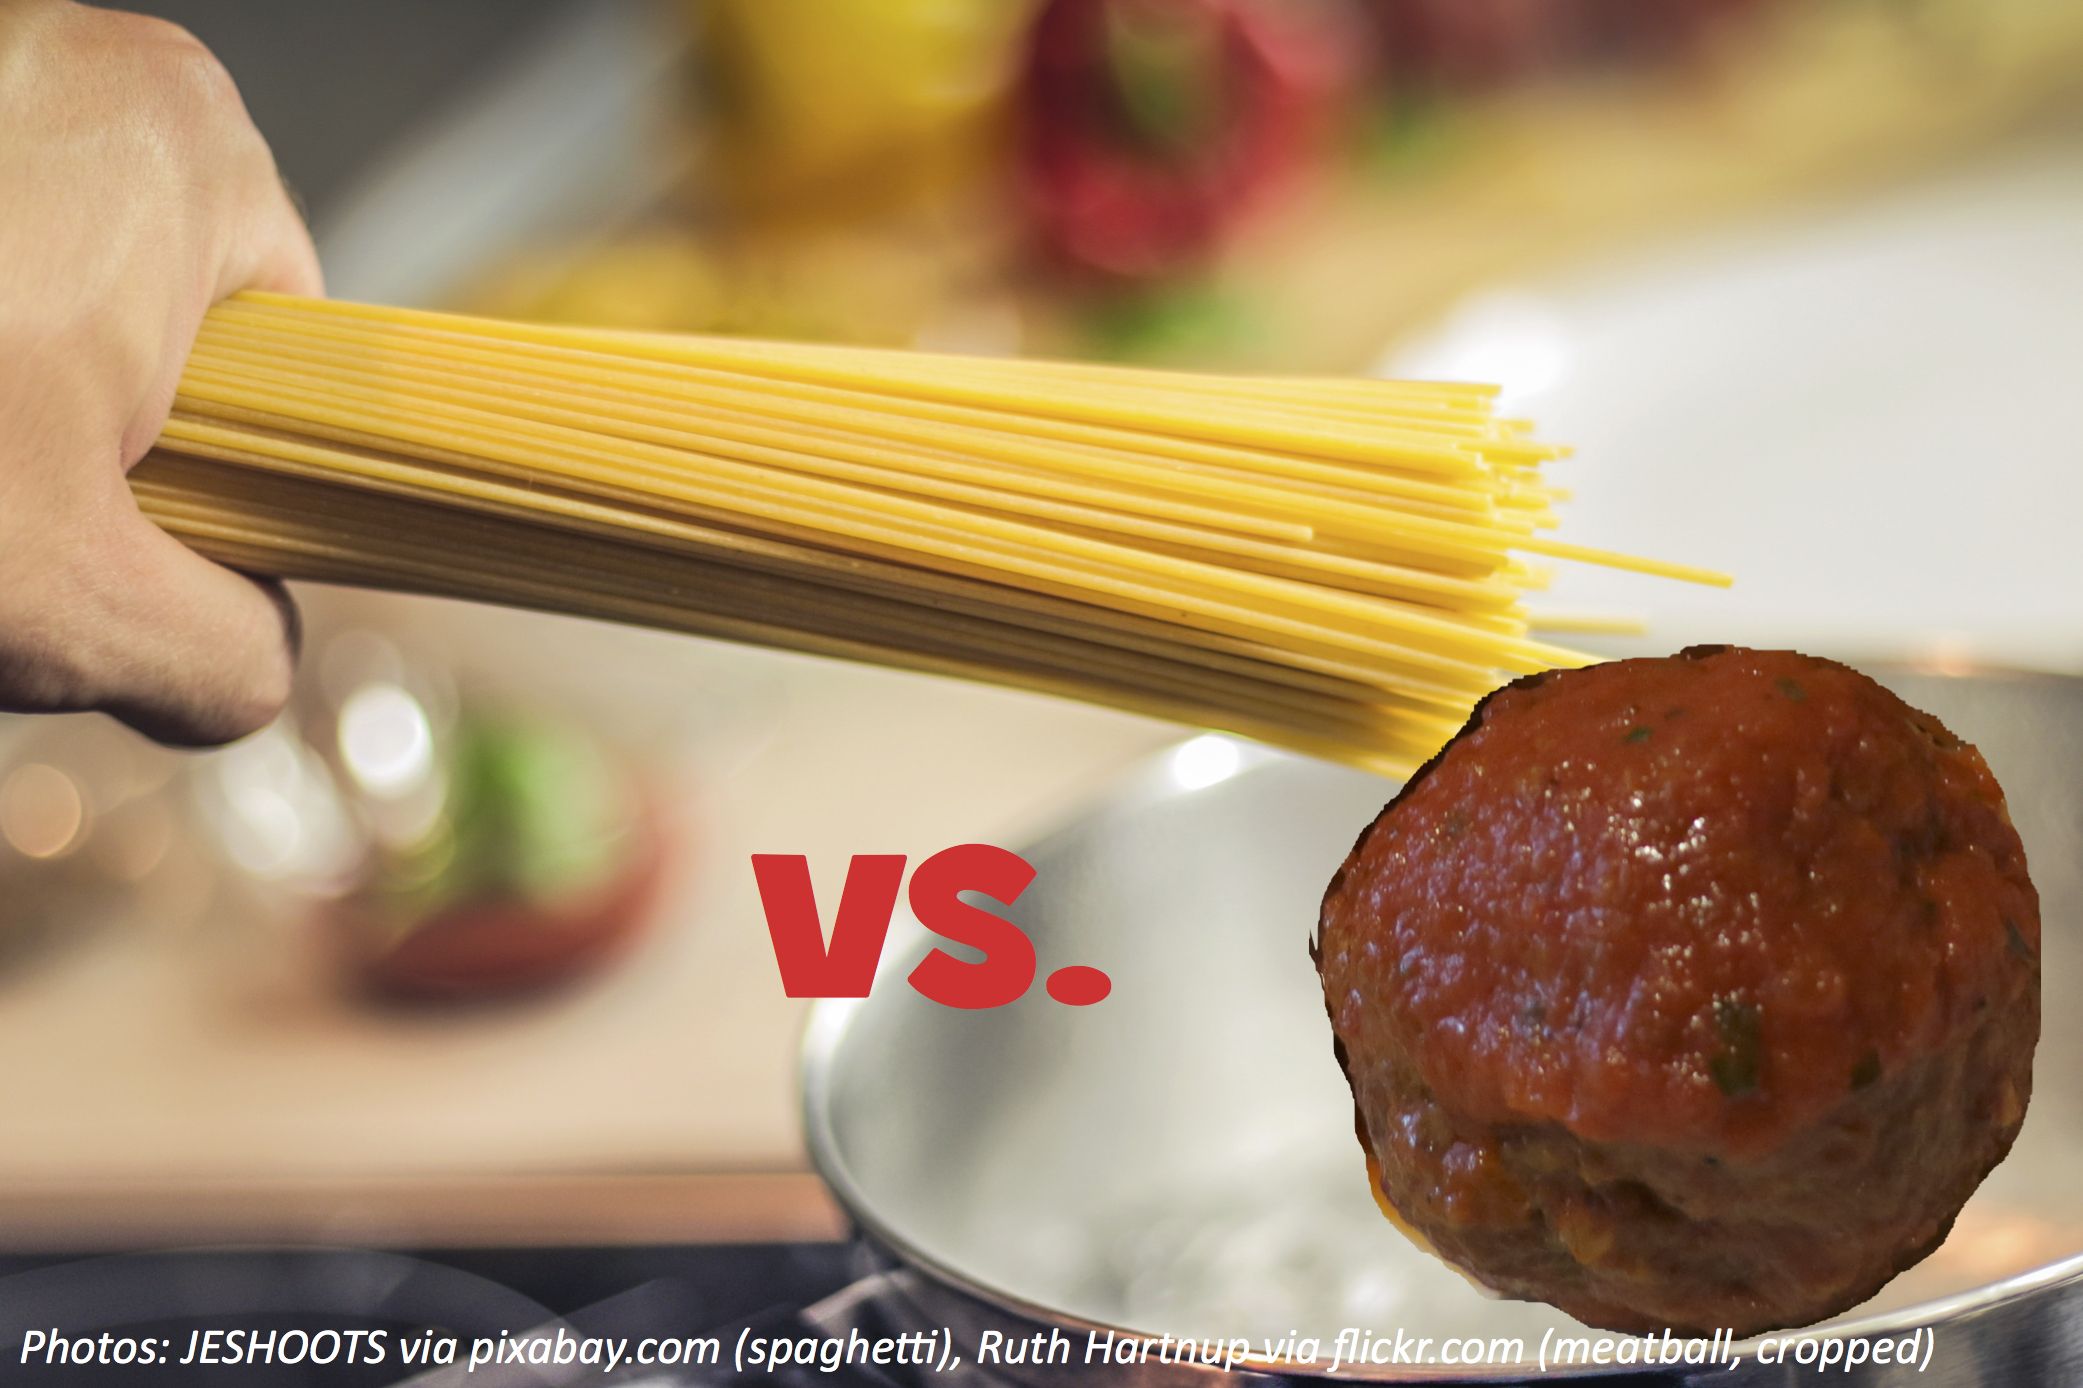 Which One Wins, the Spaghetti or the Meatball?